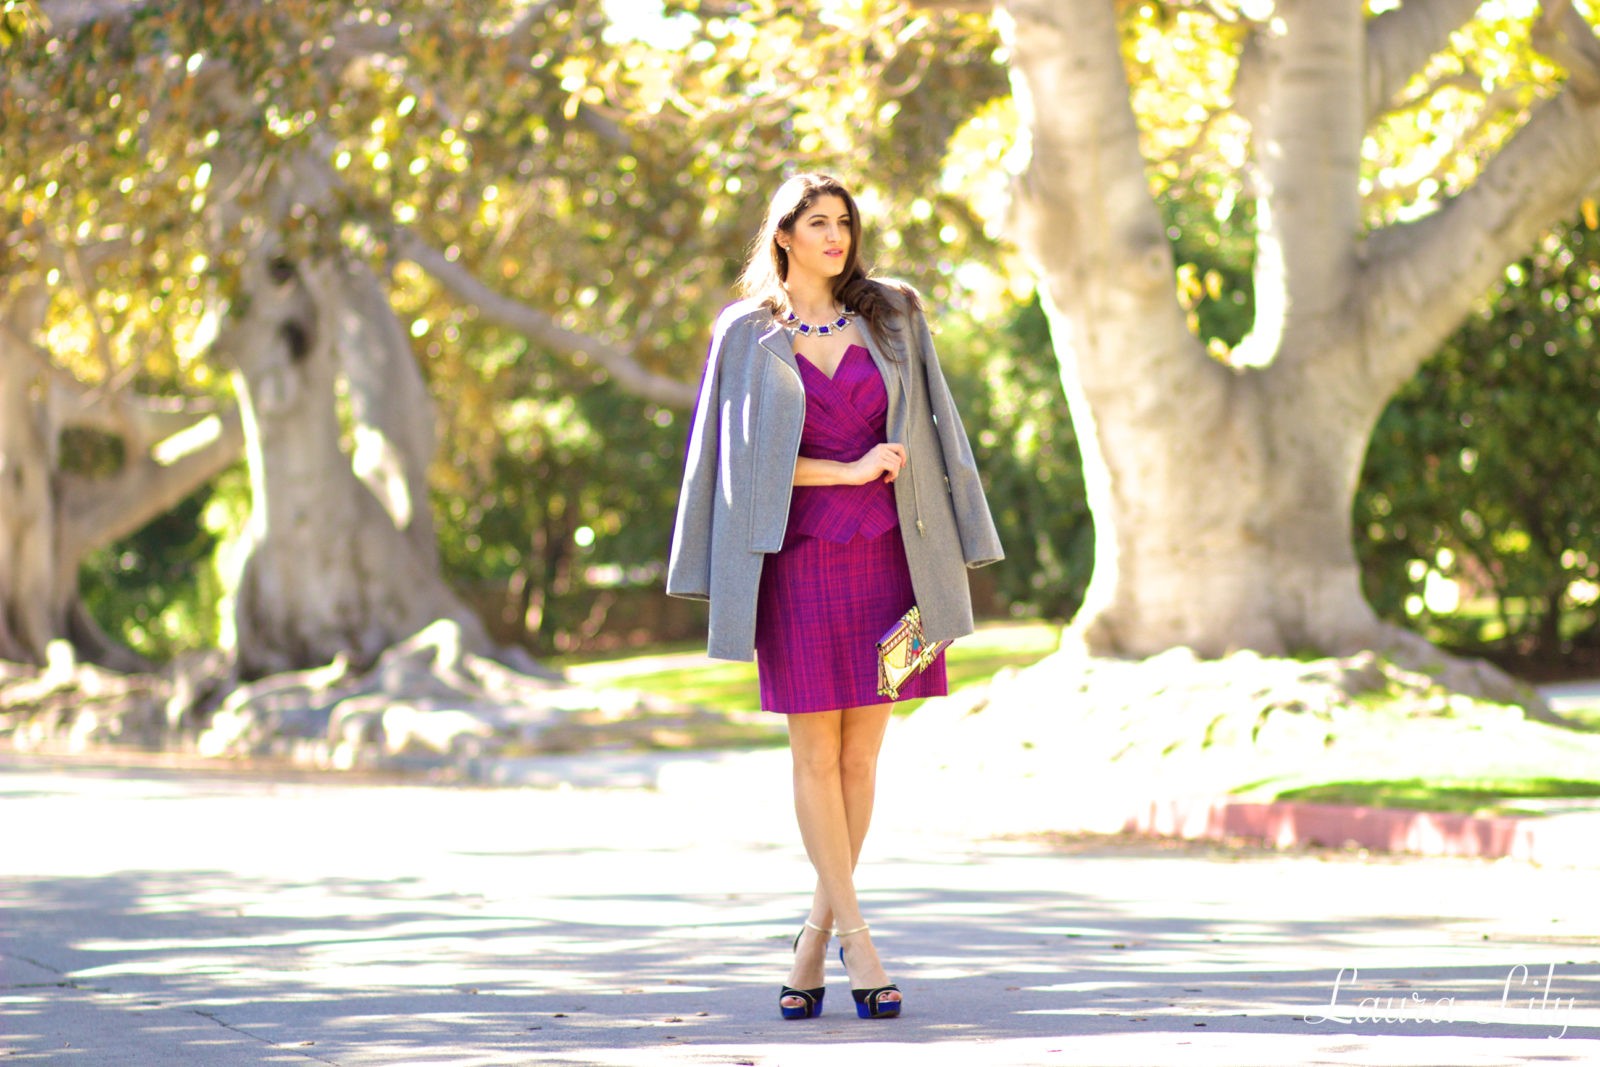 LA Fashion Blogger Laura Lily, holiday party outfit ideas, #12DaysofHolidayStyle, 1.State Boxy Topper Coat, Tweed and Peplum Trina Turk Dress, Sole Society statement necklace, Ivanka Trump Colorblock heels, holiday outfit ideas